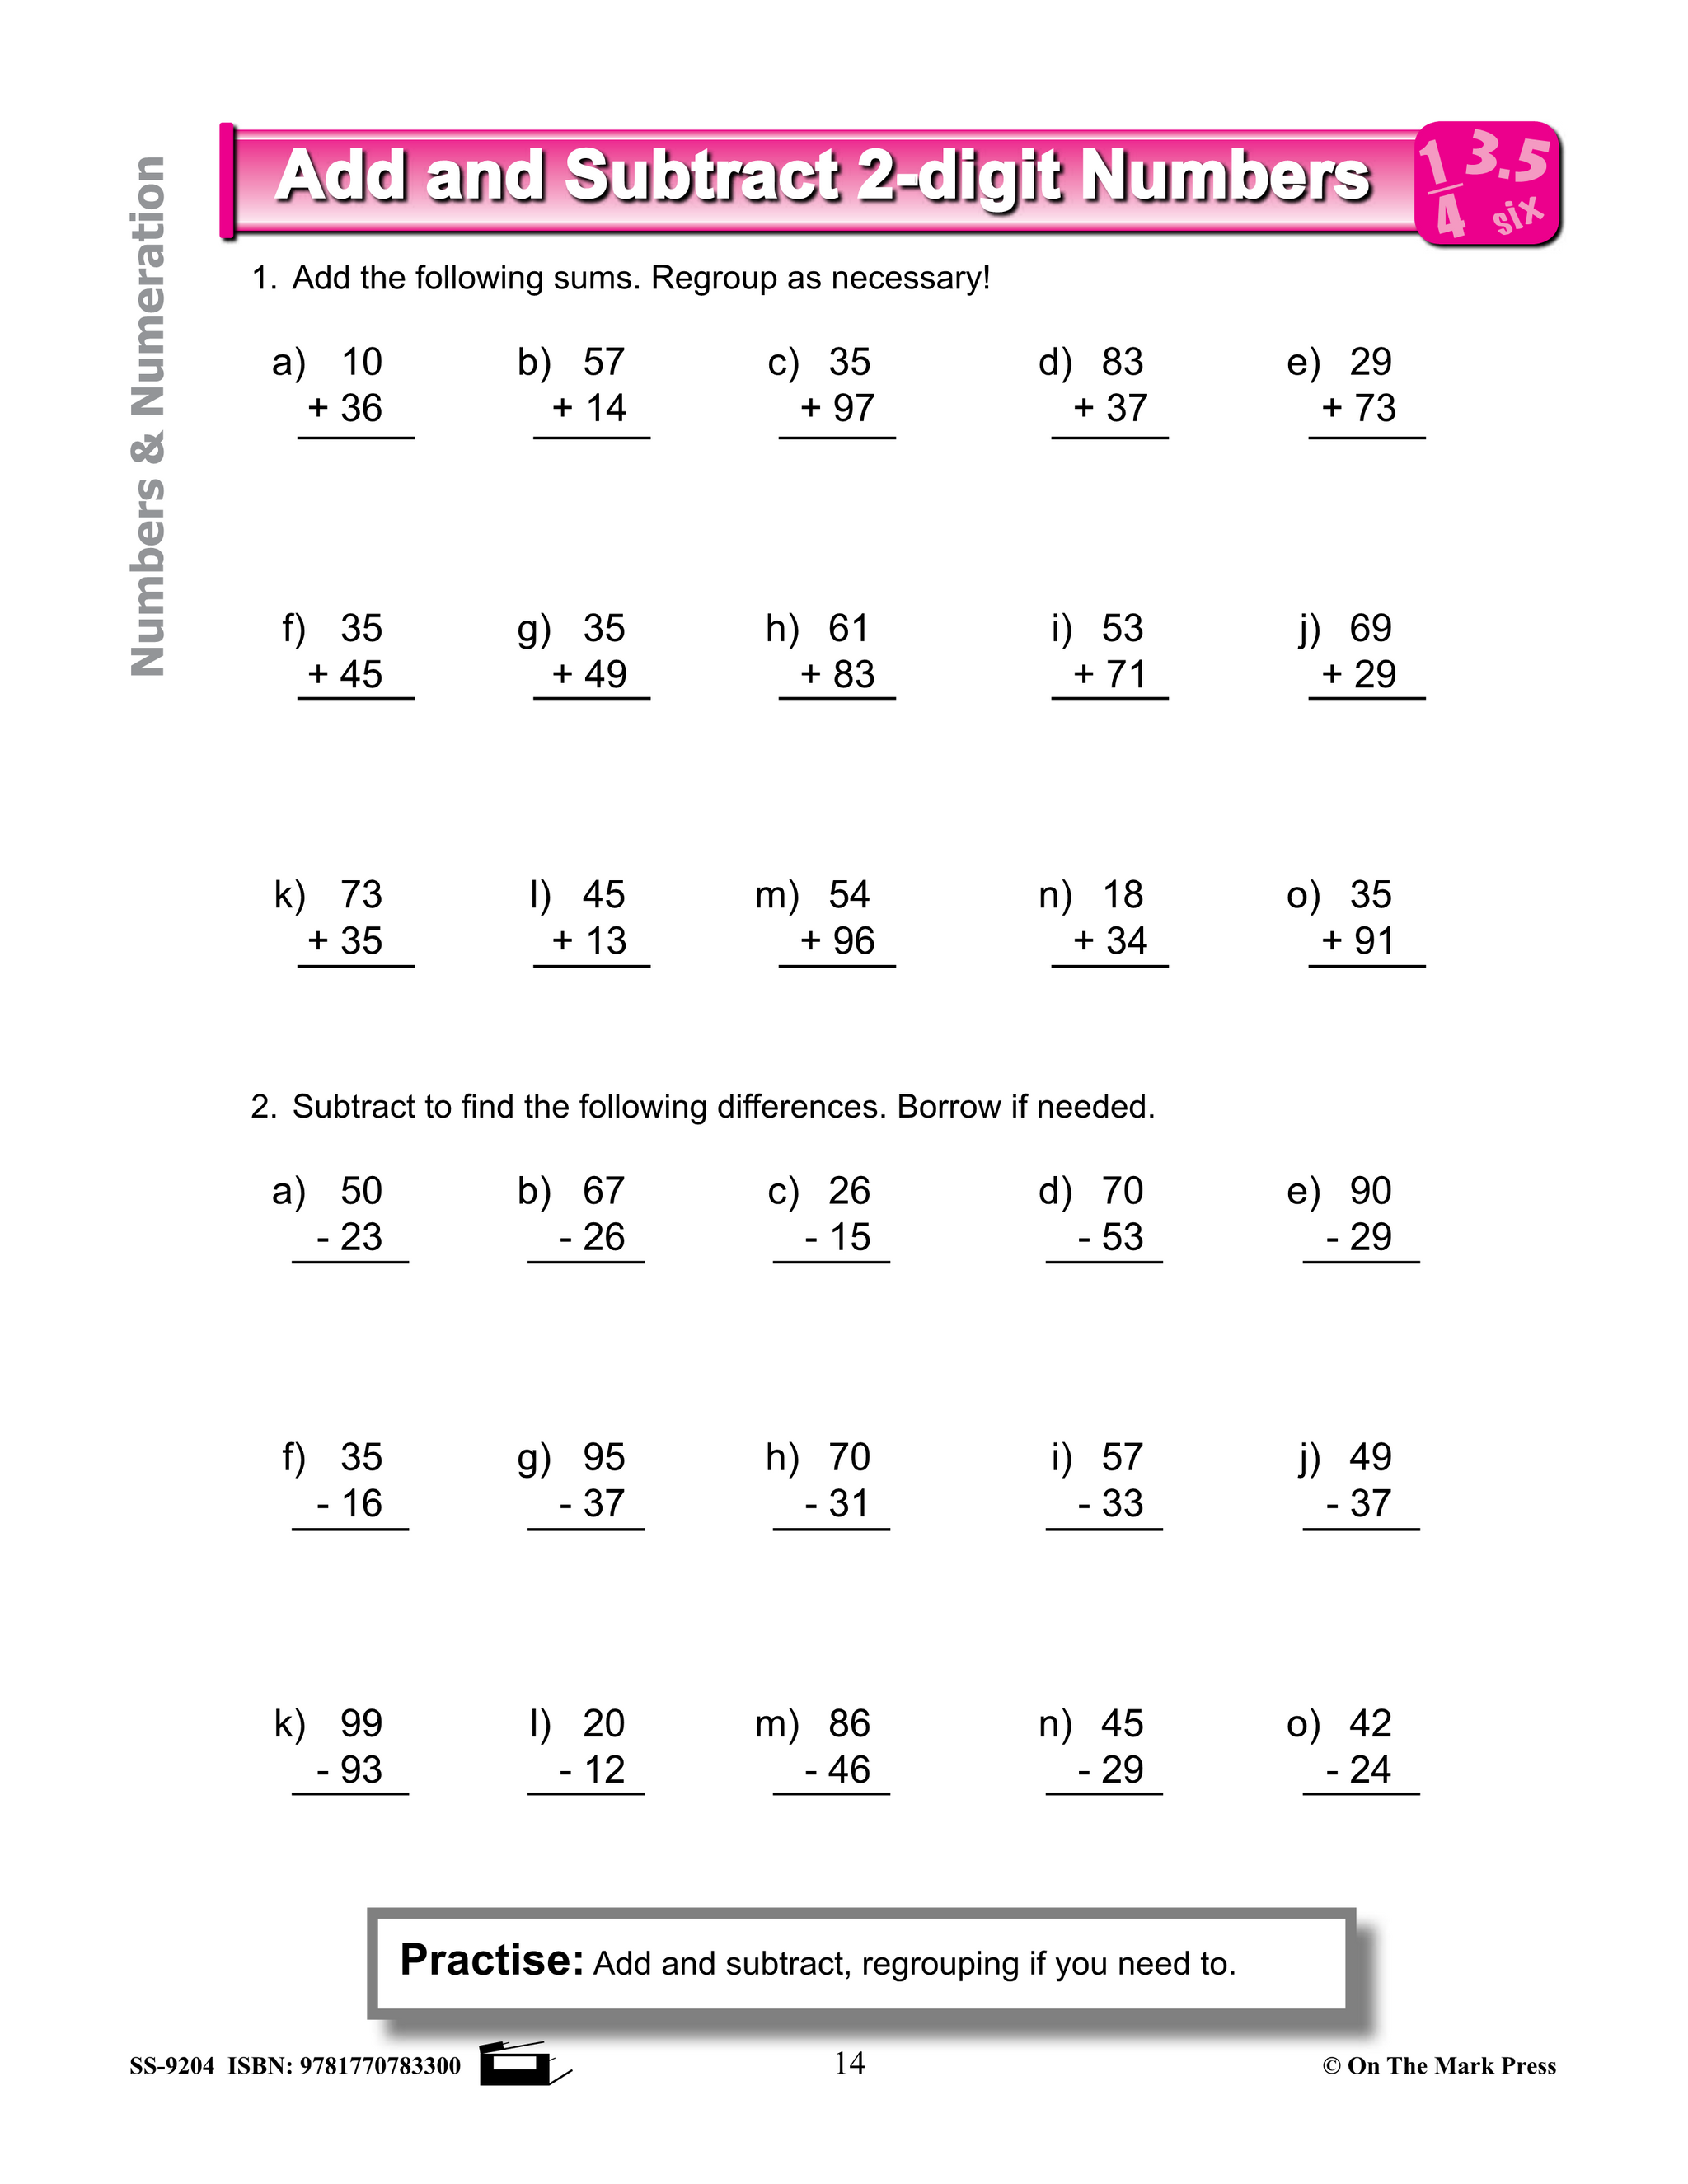 money-worksheets-canada-comparing-sums-of-canadian-coins-sameehaxymansell52z